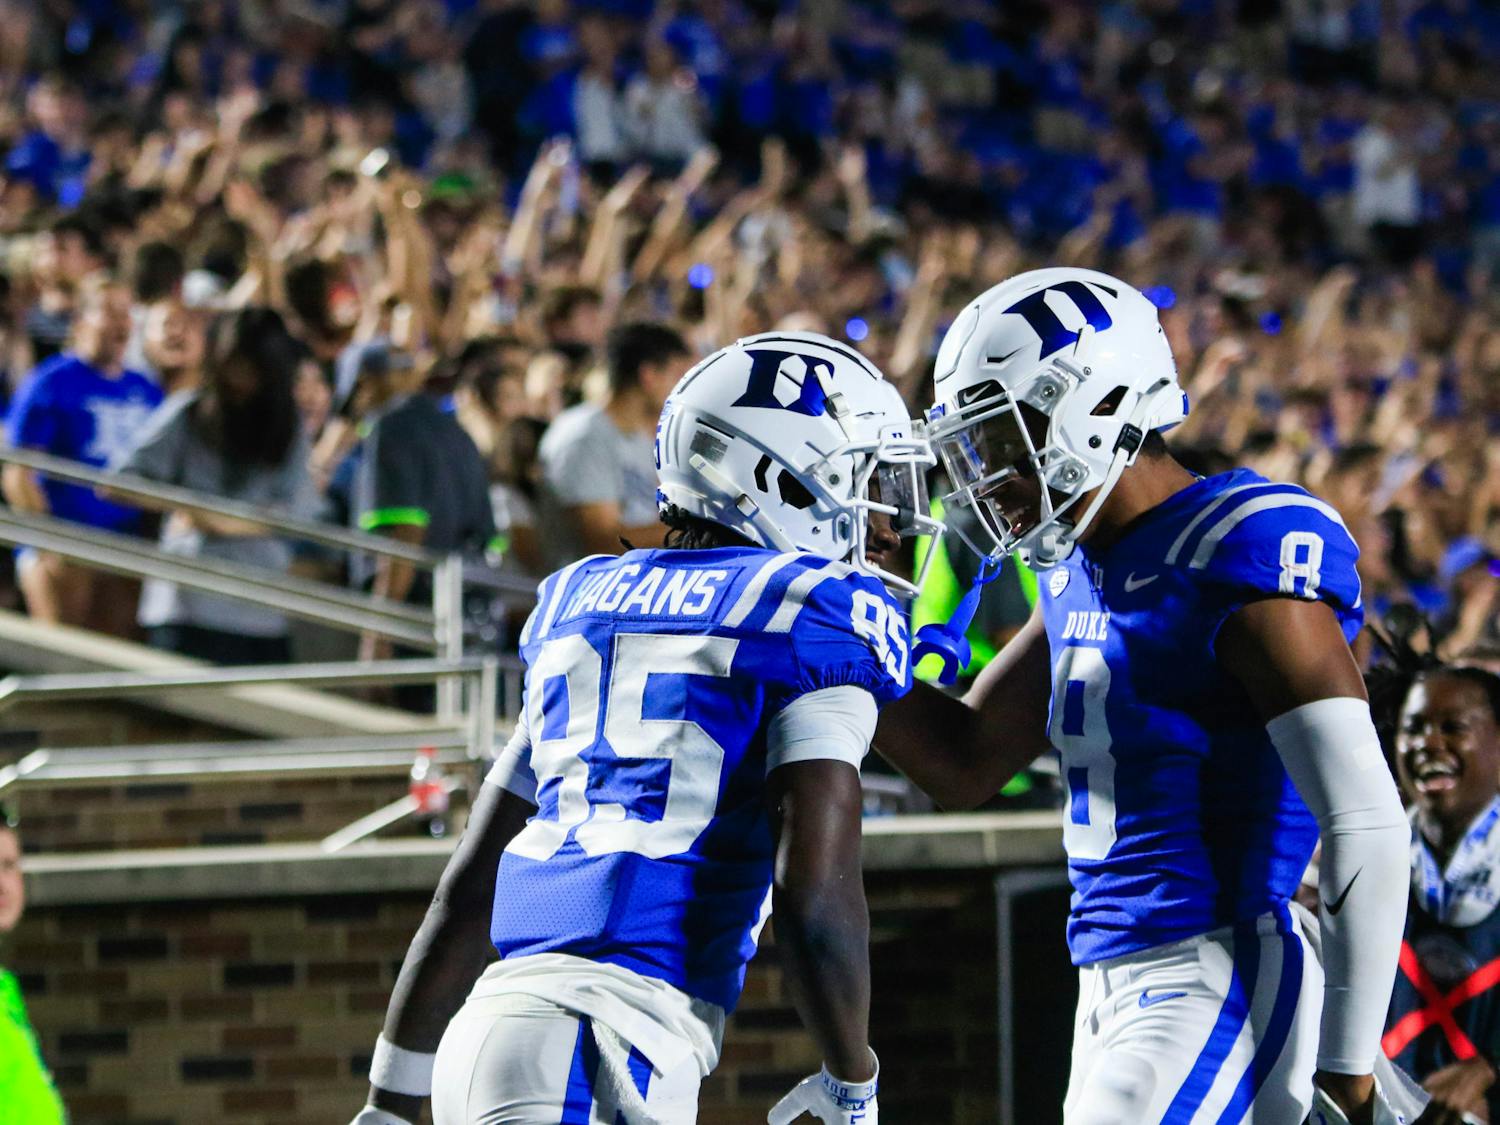 Moore hauled in six receptions for 77 yards in Duke's home-opener against Temple.